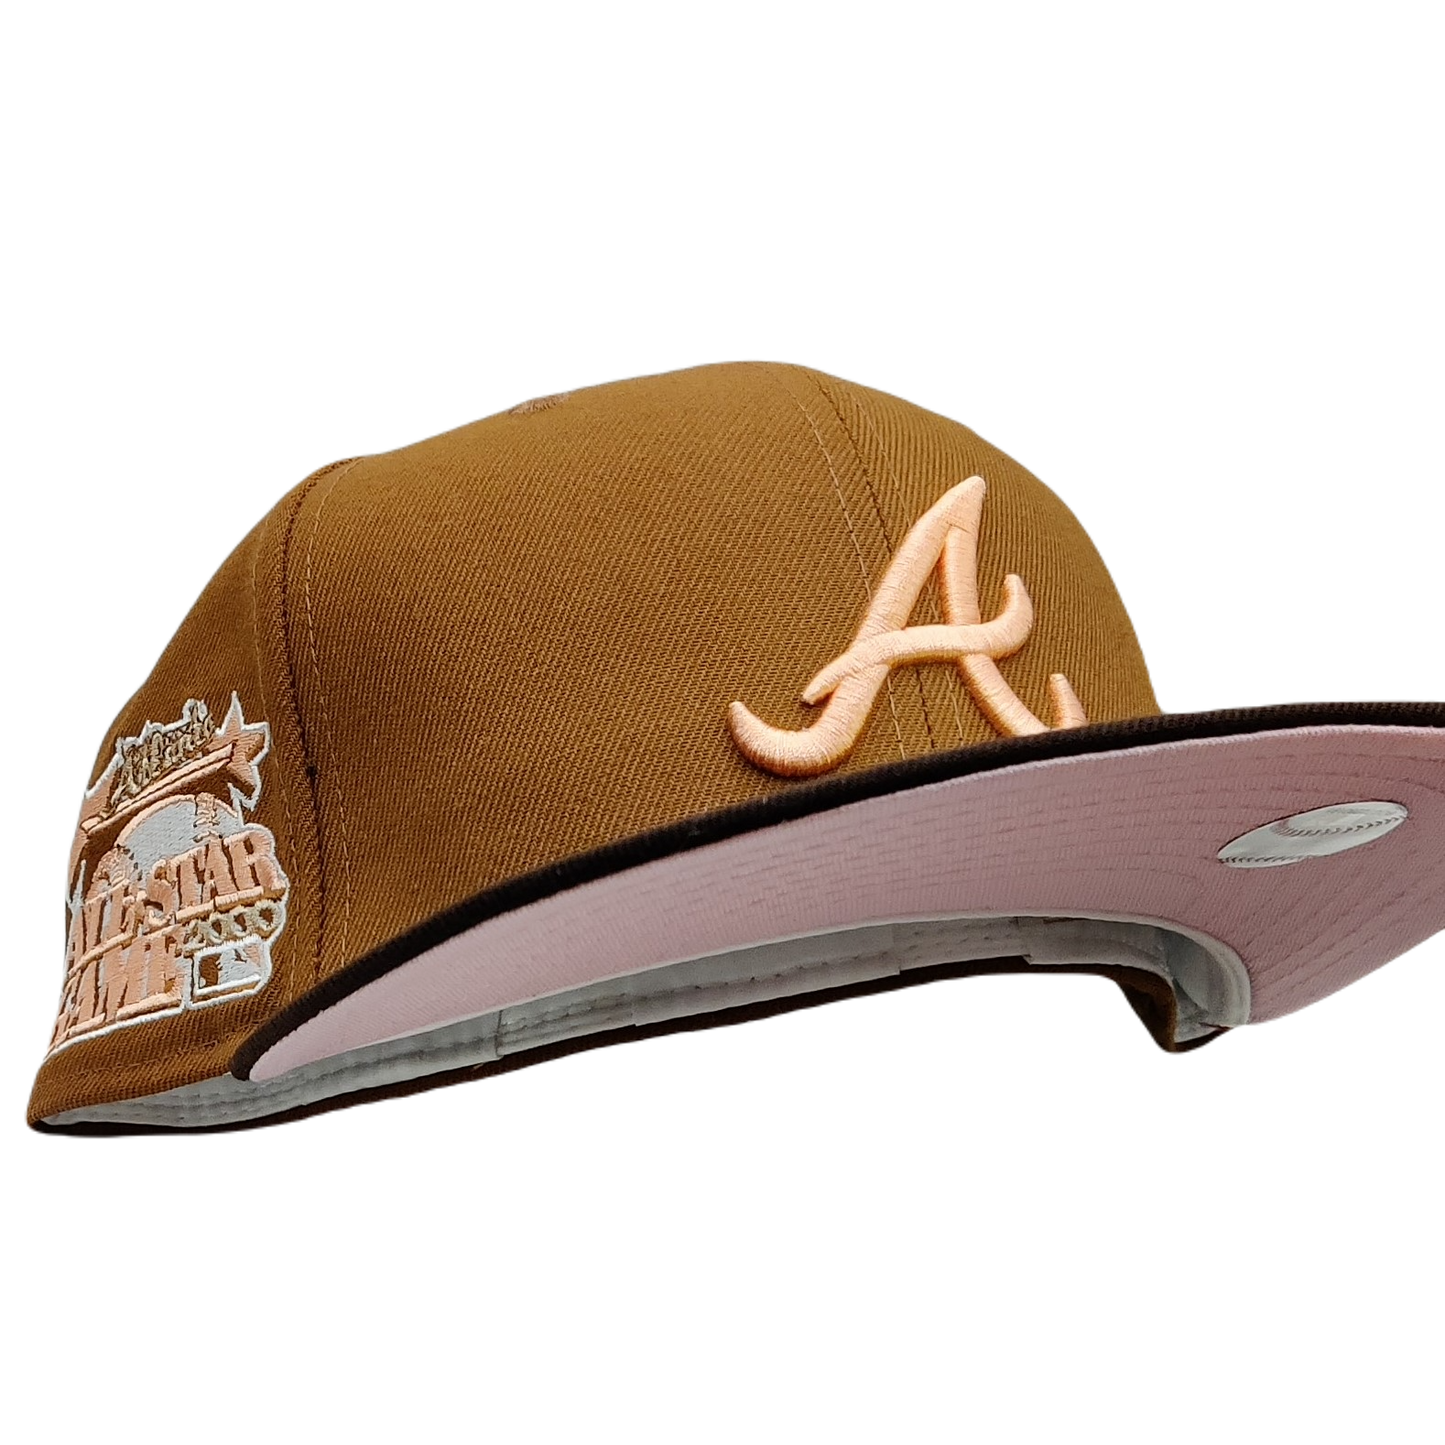 New Era 59Fifty Atlanta Braves 2000 All-Star Game Patch Fitted Hat